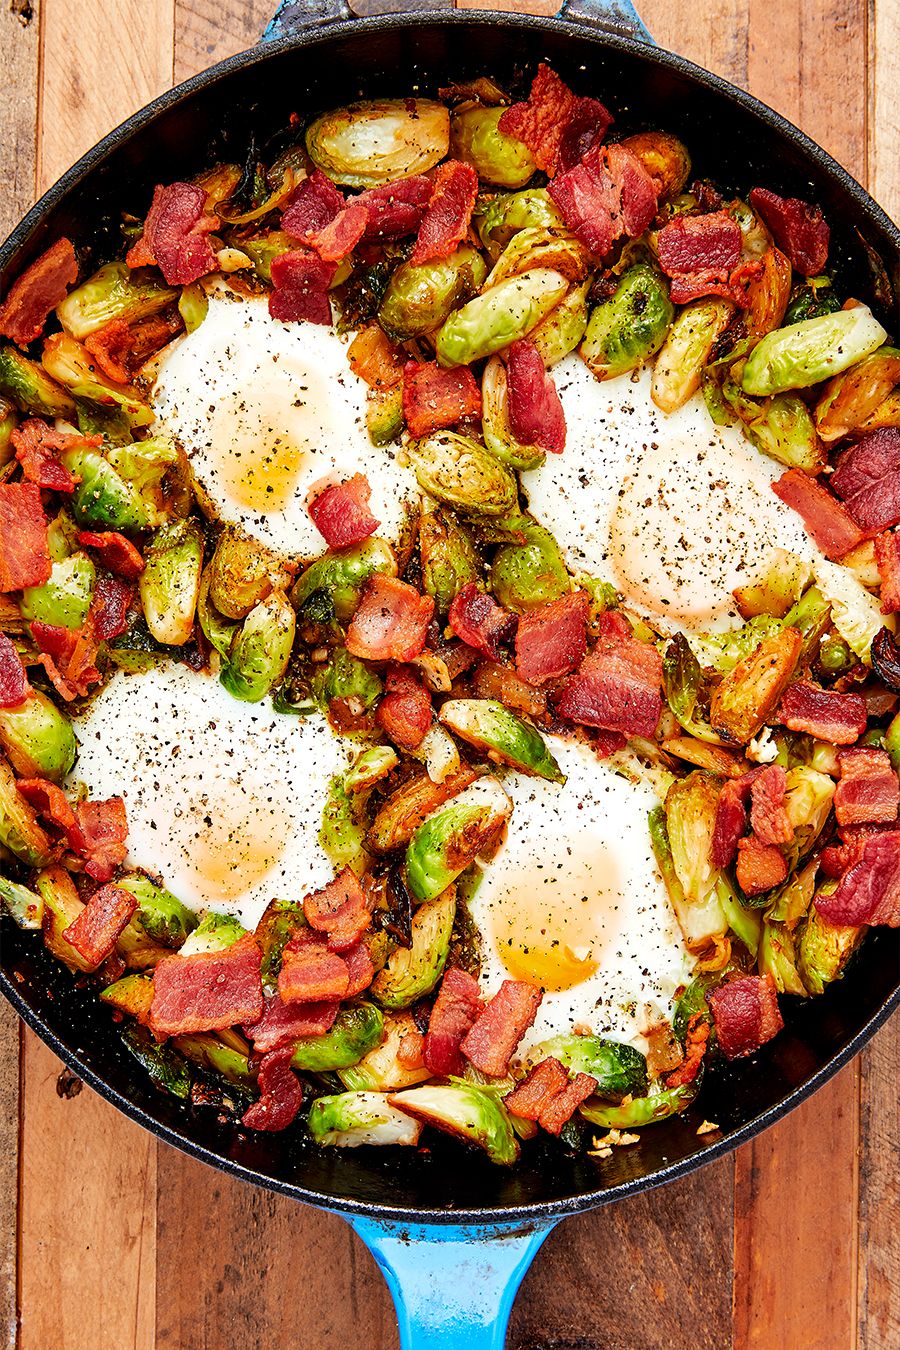 brussels sprouts hash delishcom